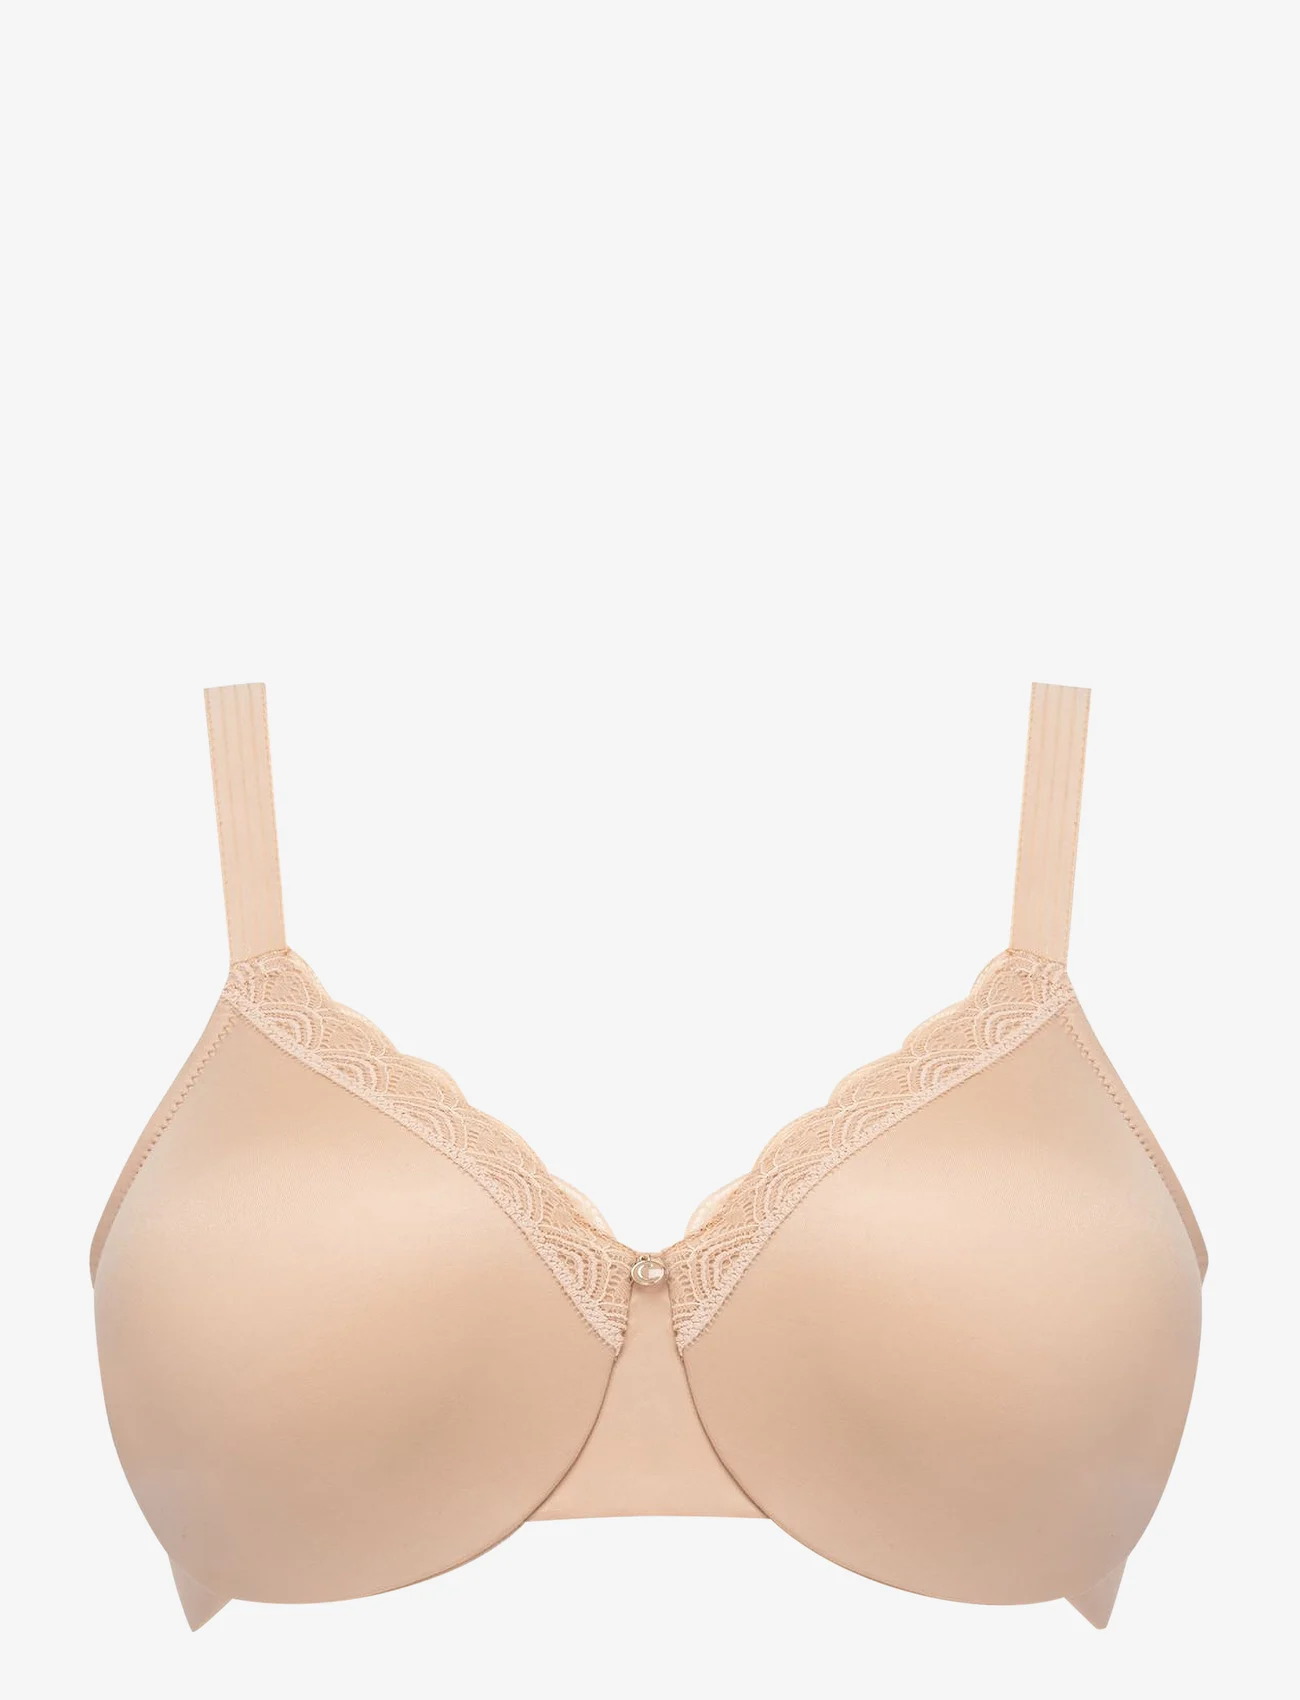 CHANTELLE - CO BRA WIRED 3 PARTIES - full cup bras - nude - 0